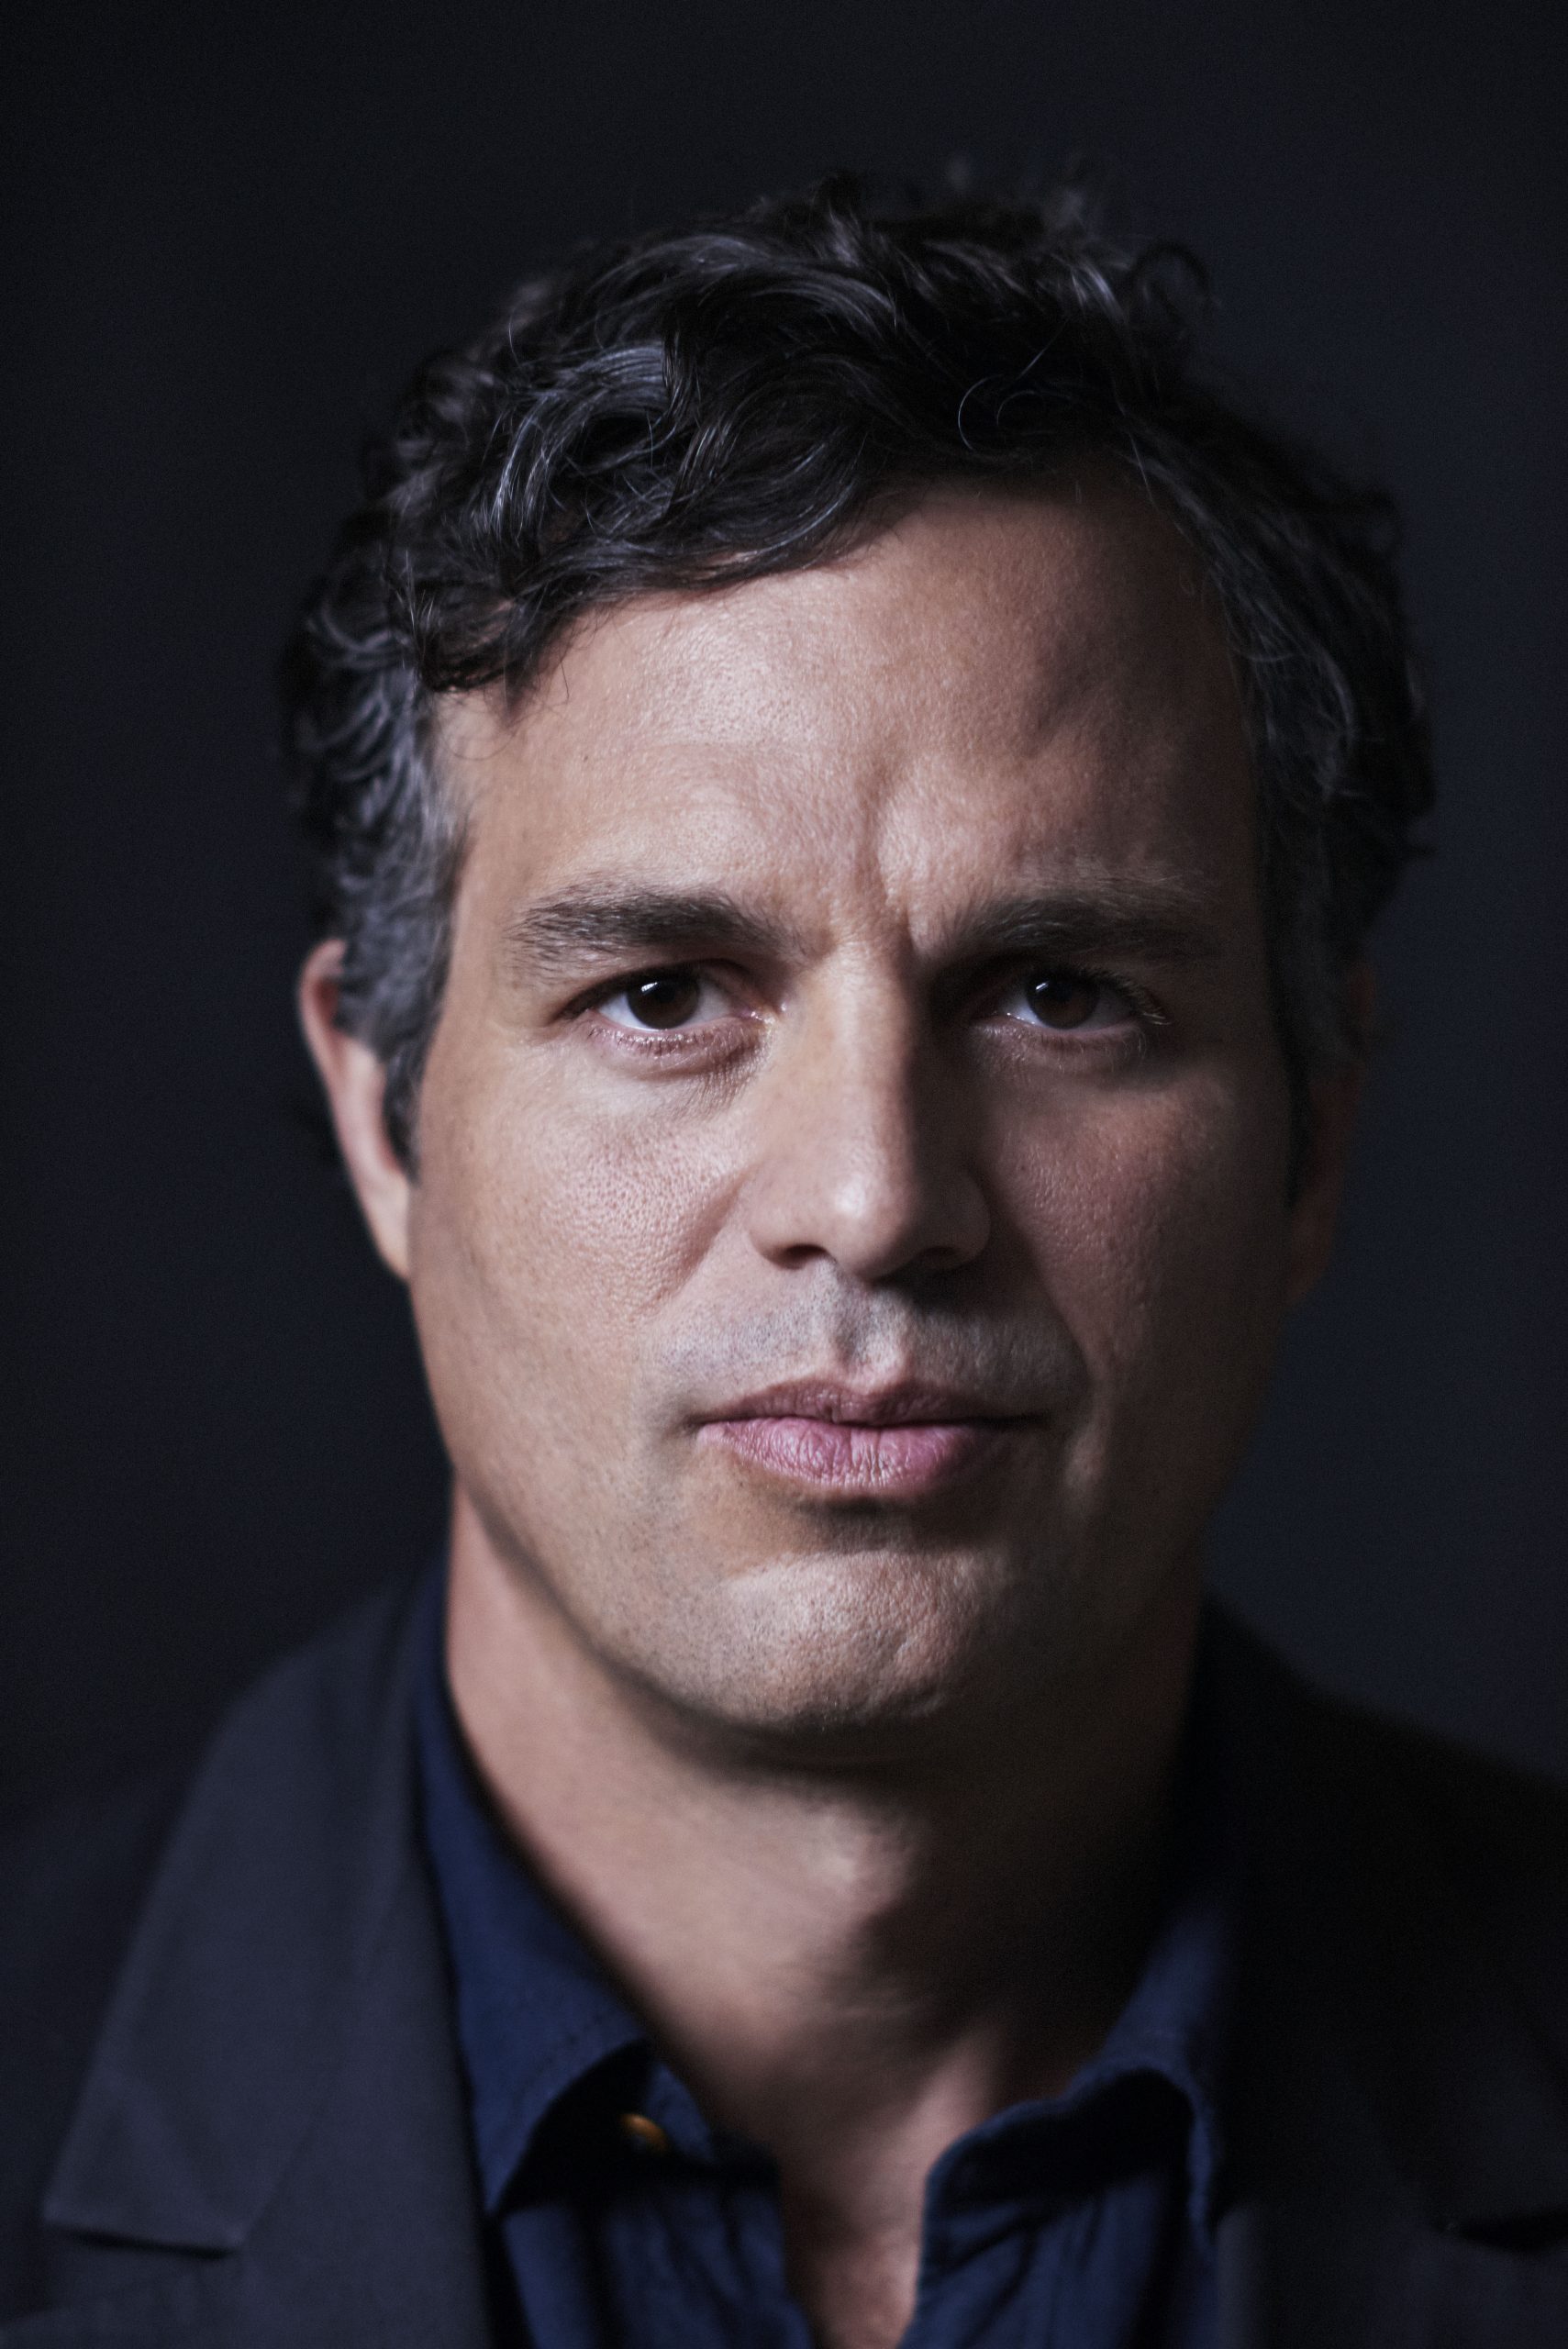 ACTOR MARK RUFFALO TO BE HONORED WITH STAR ON THE HOLLYWOOD WALK OF FAME